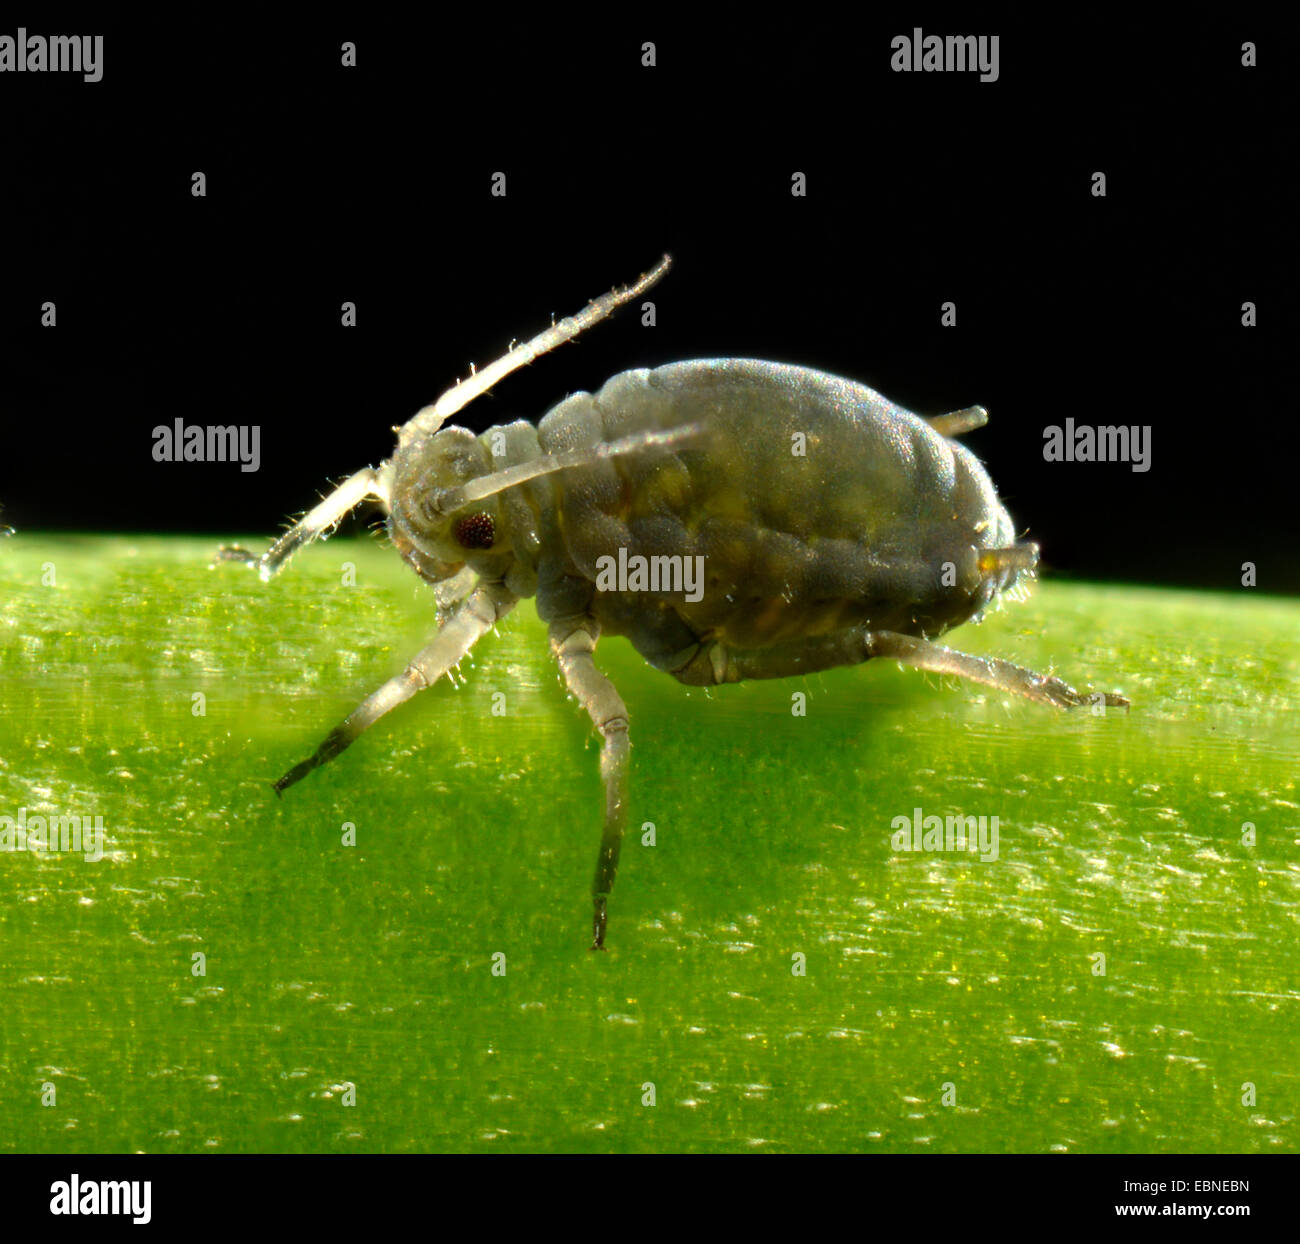 black bean aphid, blackfly (Aphis fabae), sitting on a stipe, Germany, Baden-Wuerttemberg Stock Photo